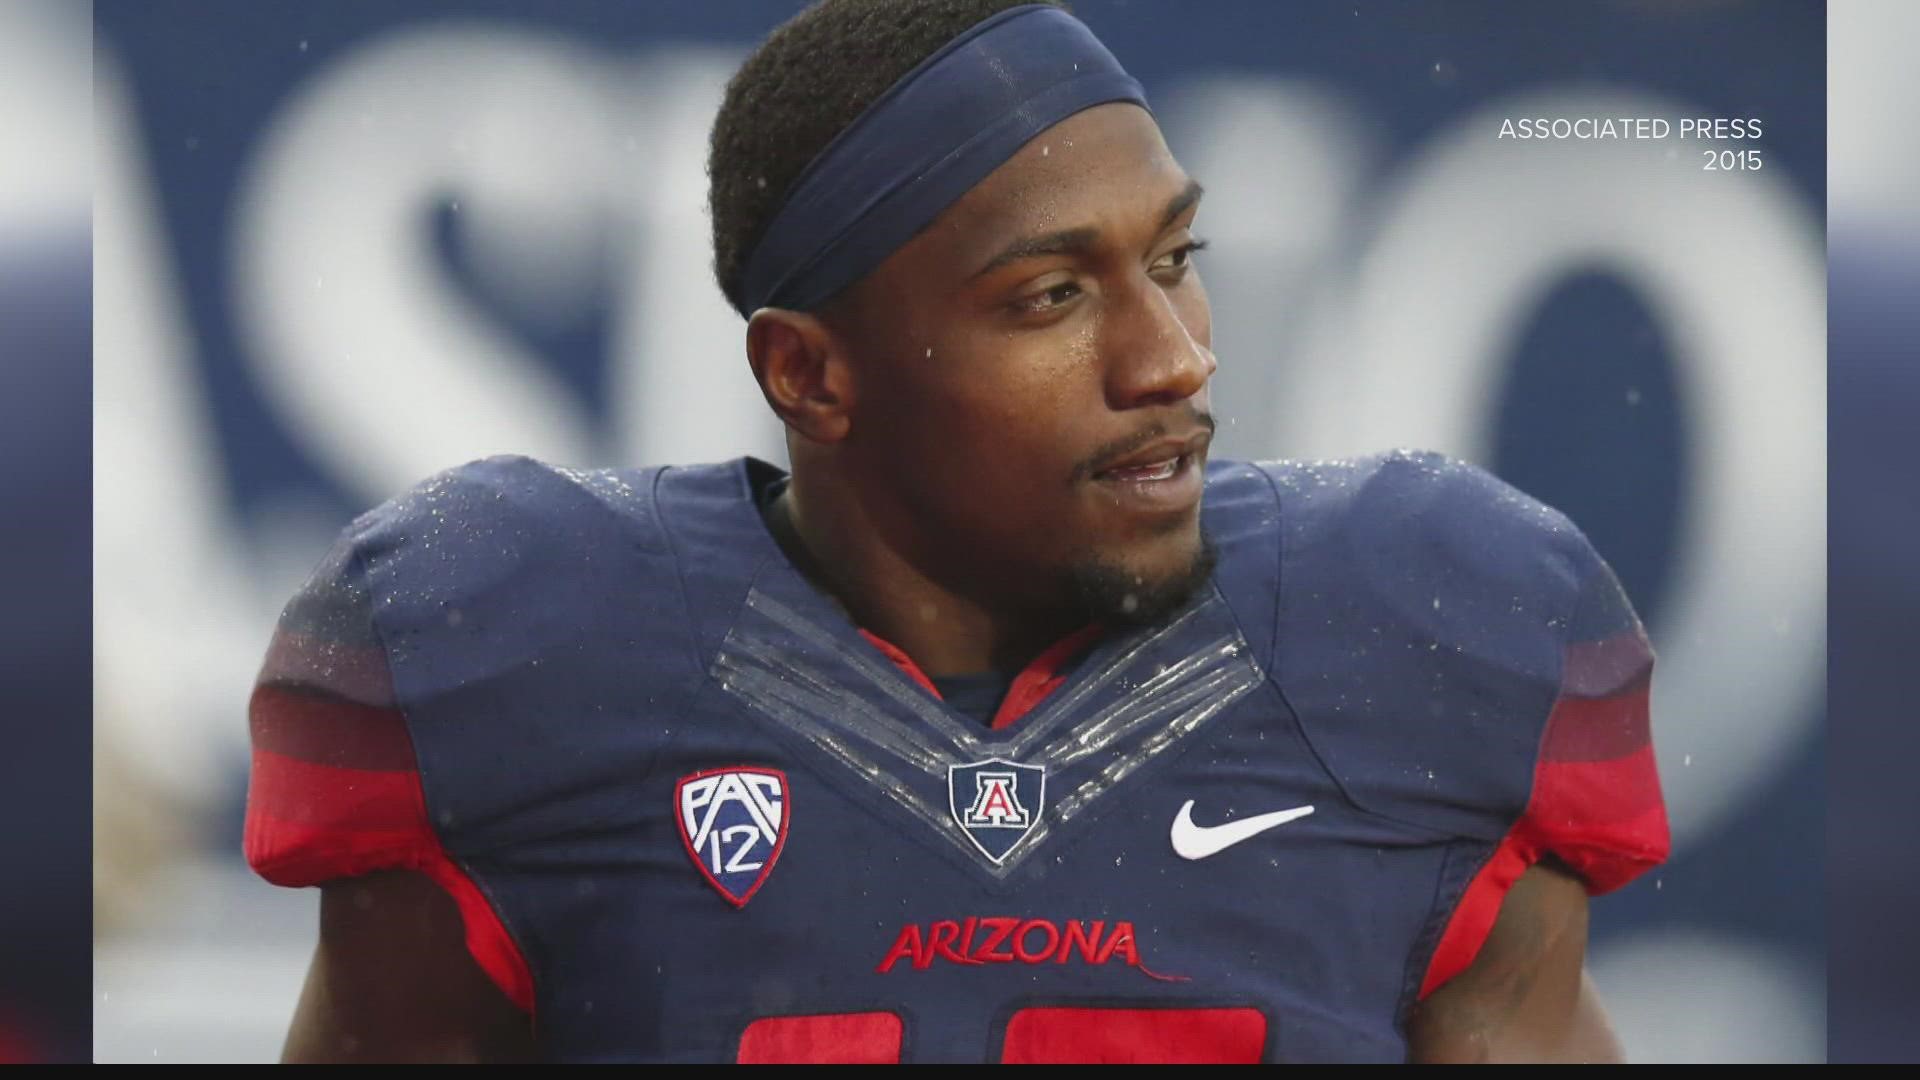 The former Arizona Wildcats football player was arrested in Idaho in June 2022 for the 2017 murder of 25-year-old Bryan Burns.